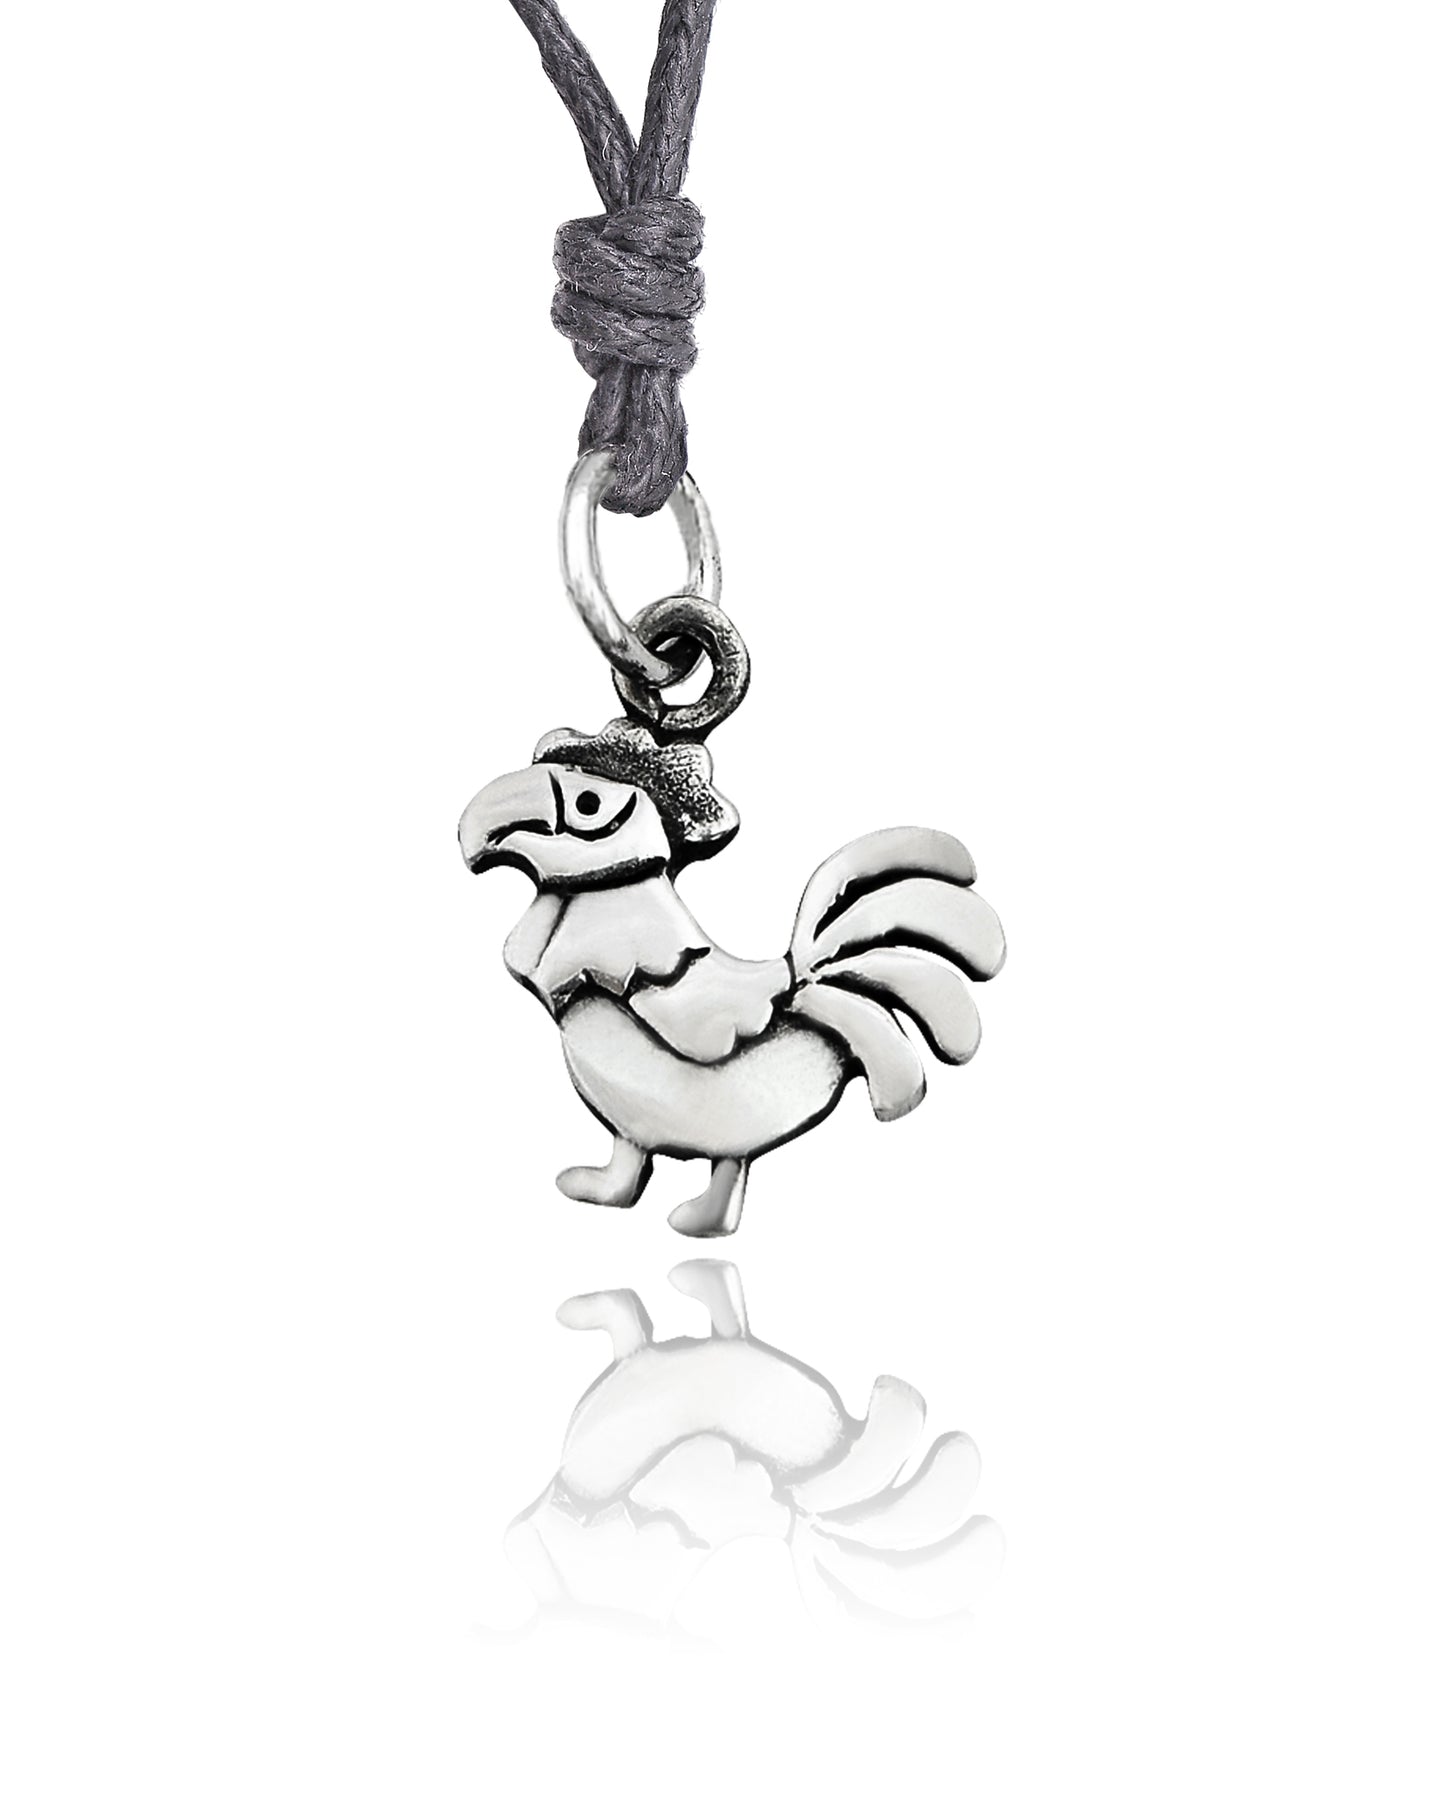 Chicken Rooster Cock Silver Pewter Charm Necklace Pendant Jewelry